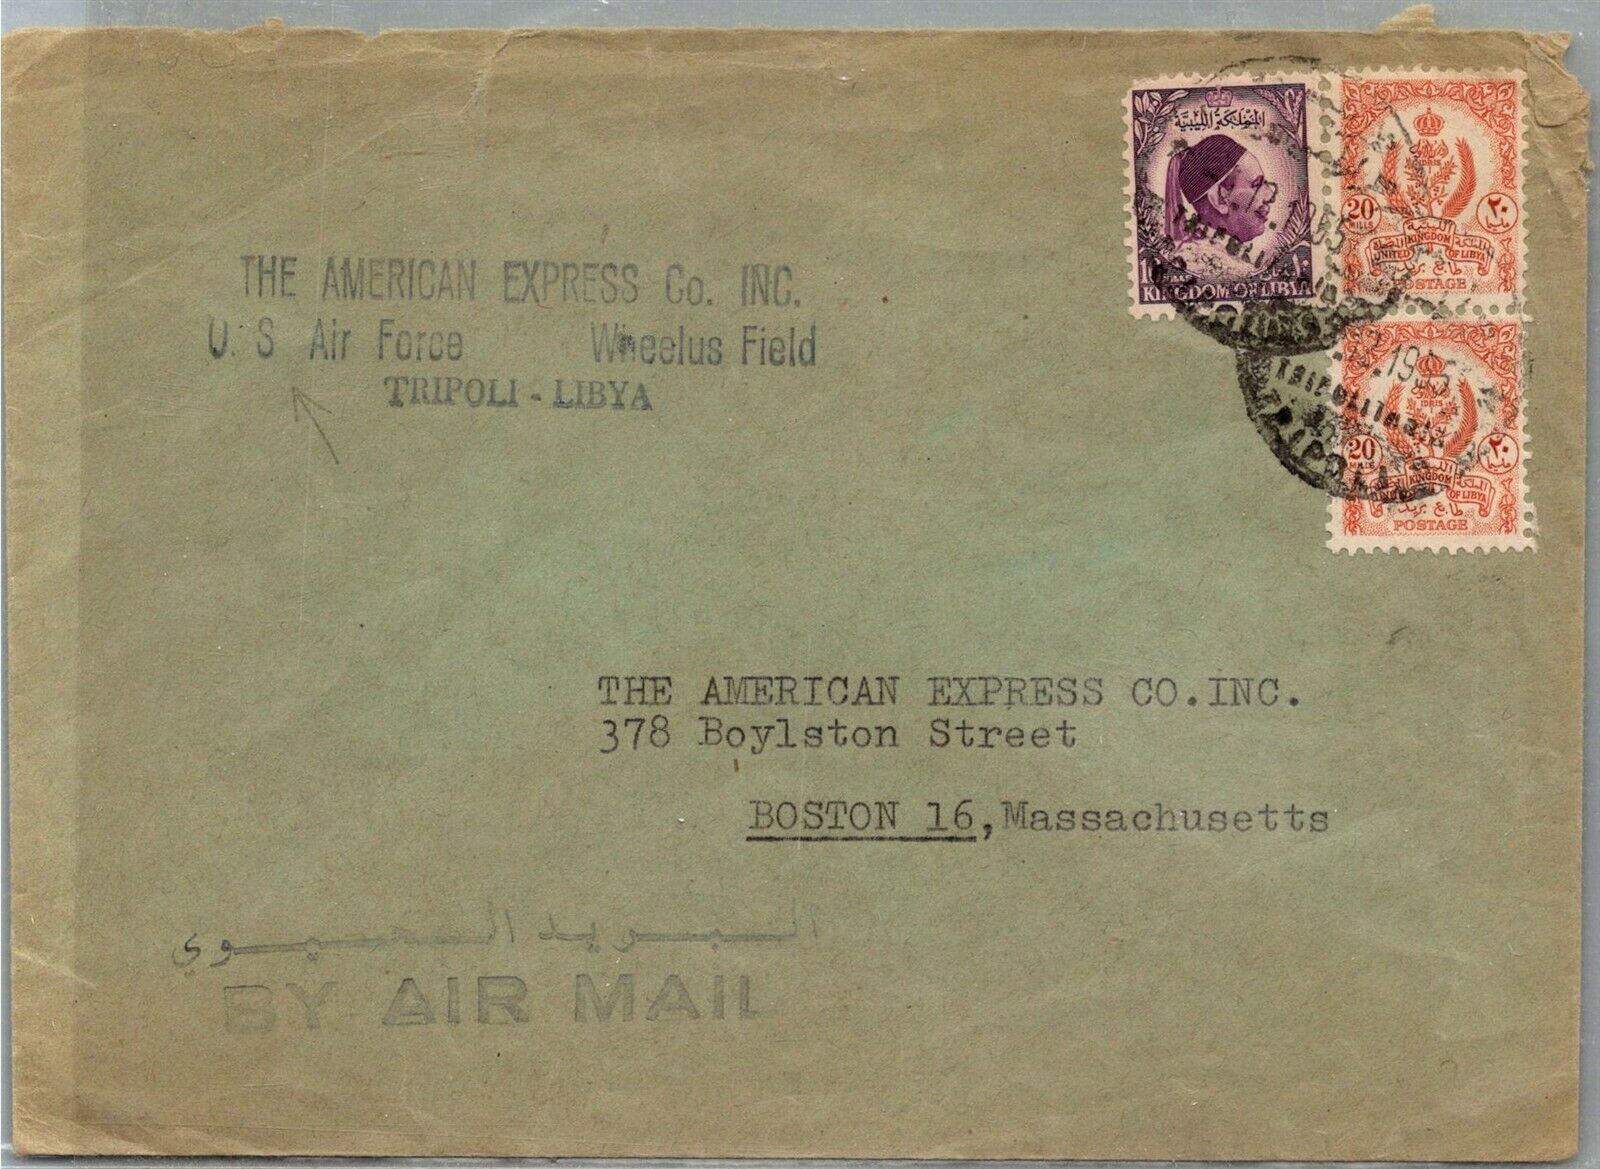 GP GOLDPATH: A surprise price is realized Super sale LIBYA COVER MAIL _CV893_P01 AIR 1955